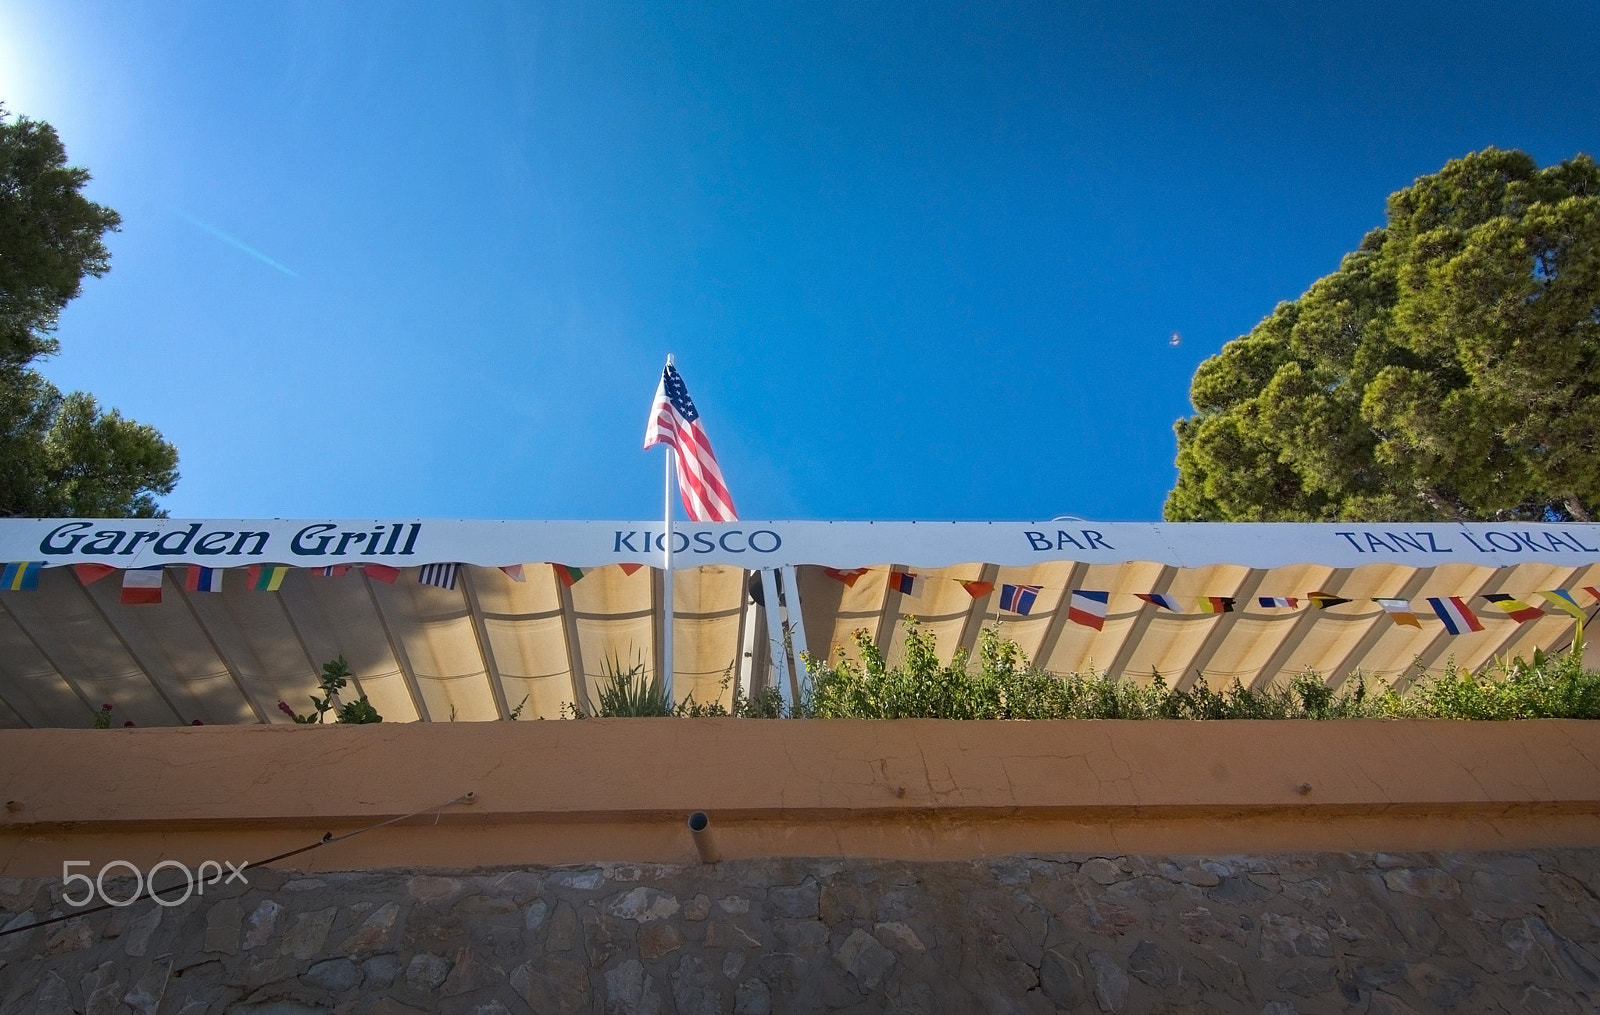 Nikon D7100 sample photo. Garden grill and bar with american flag photography